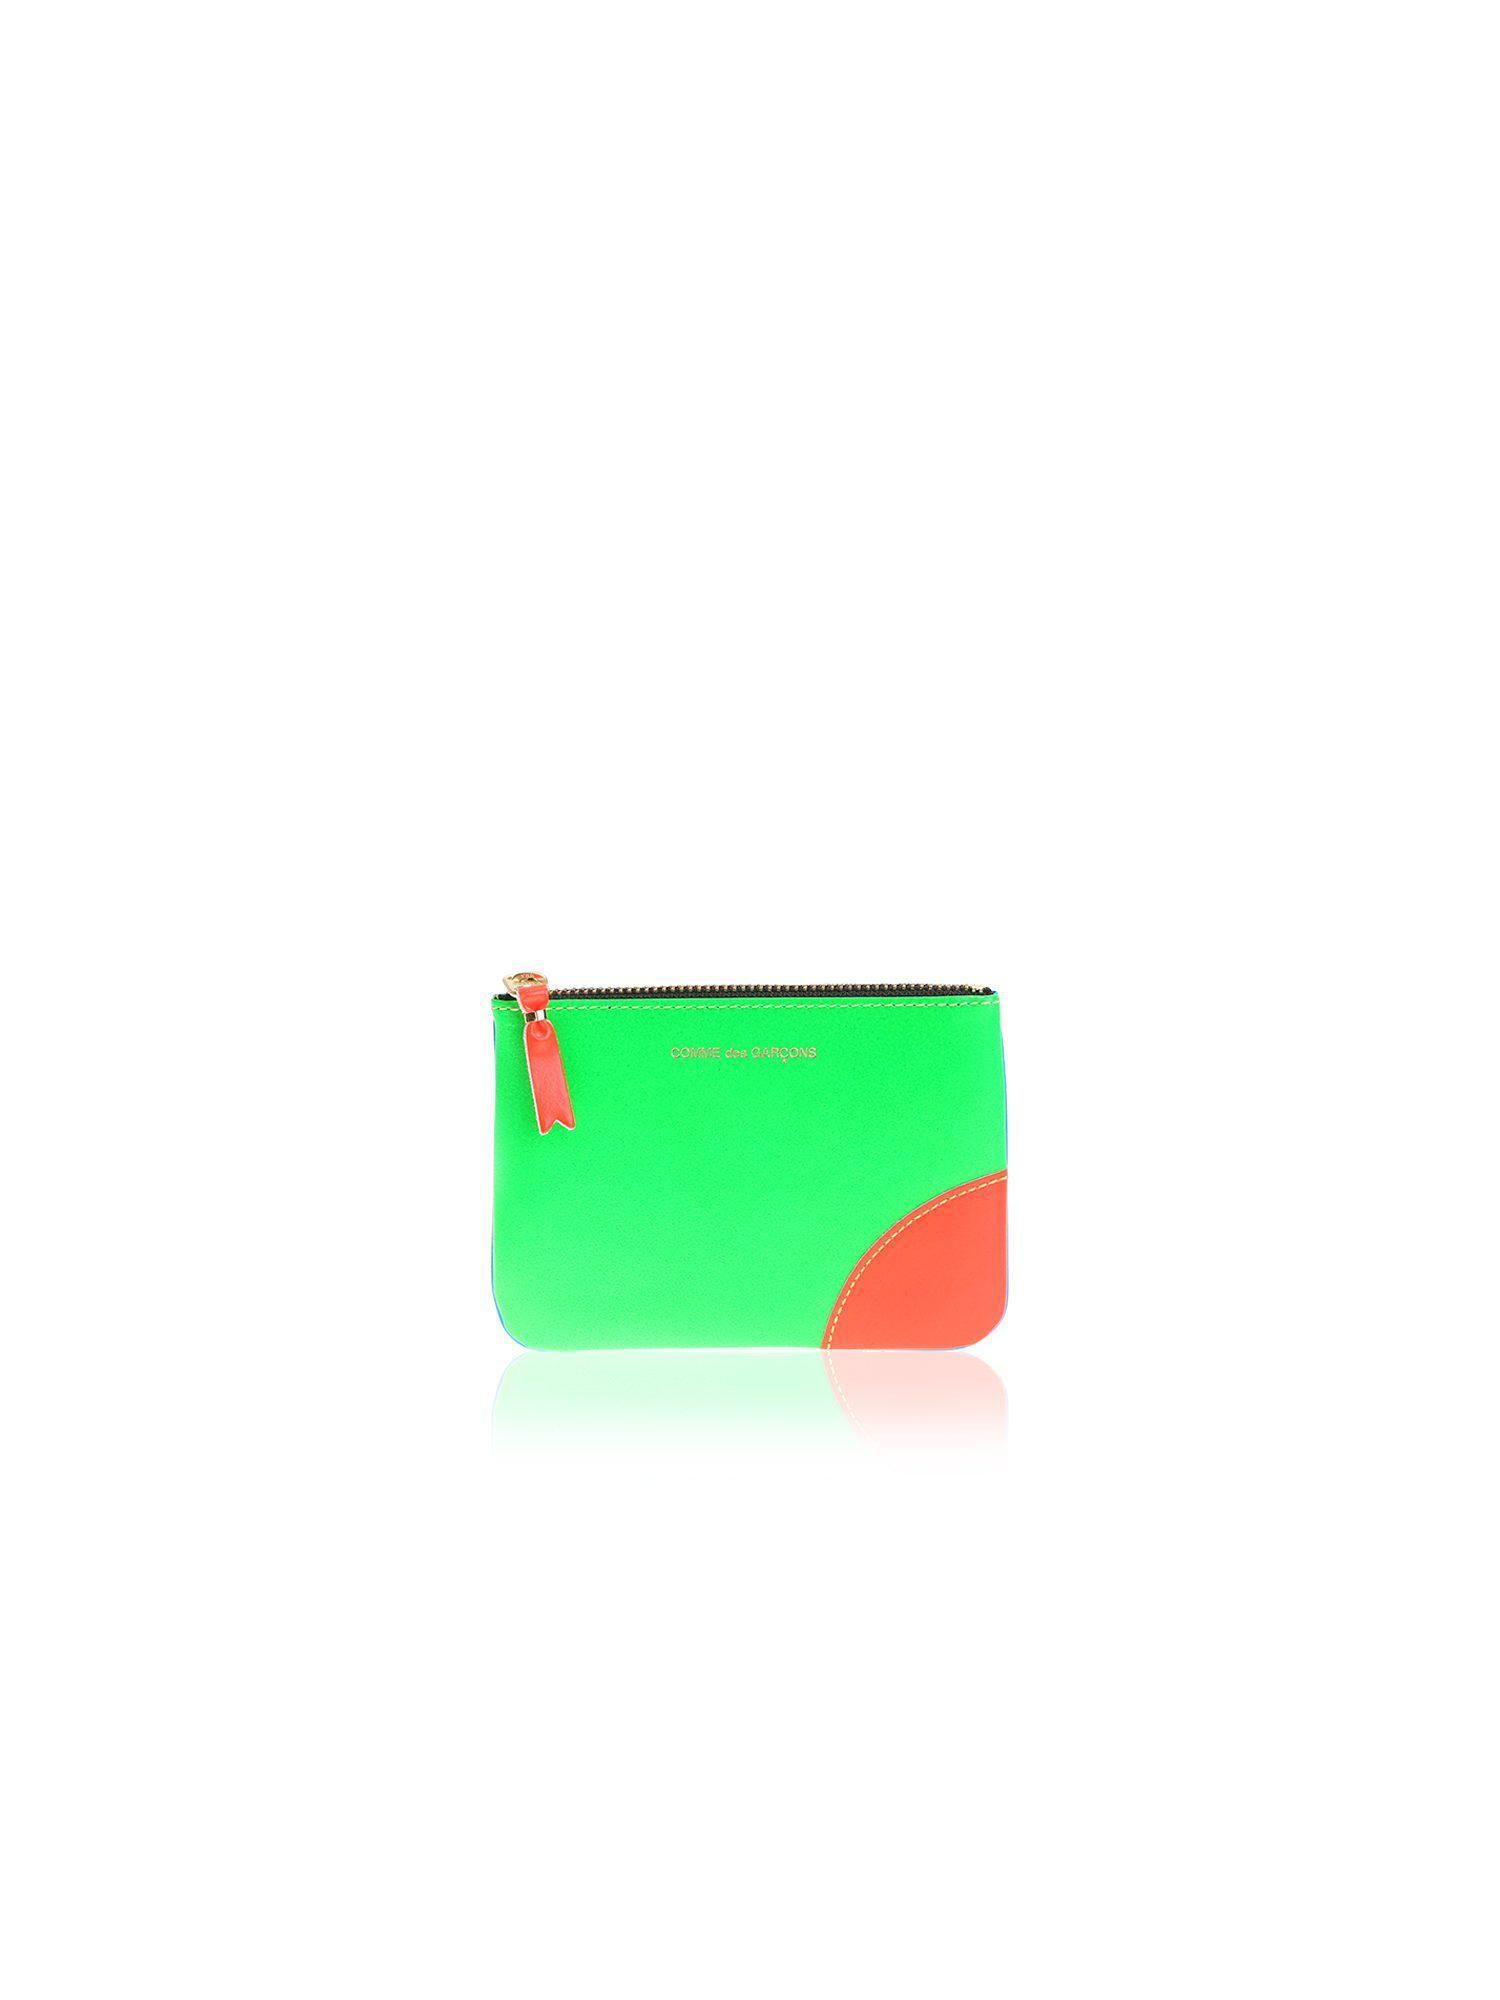 Light Blue Lime Green Logo - Comme Des Garçons Green And Neon Light Blue Leather Clutch in Green